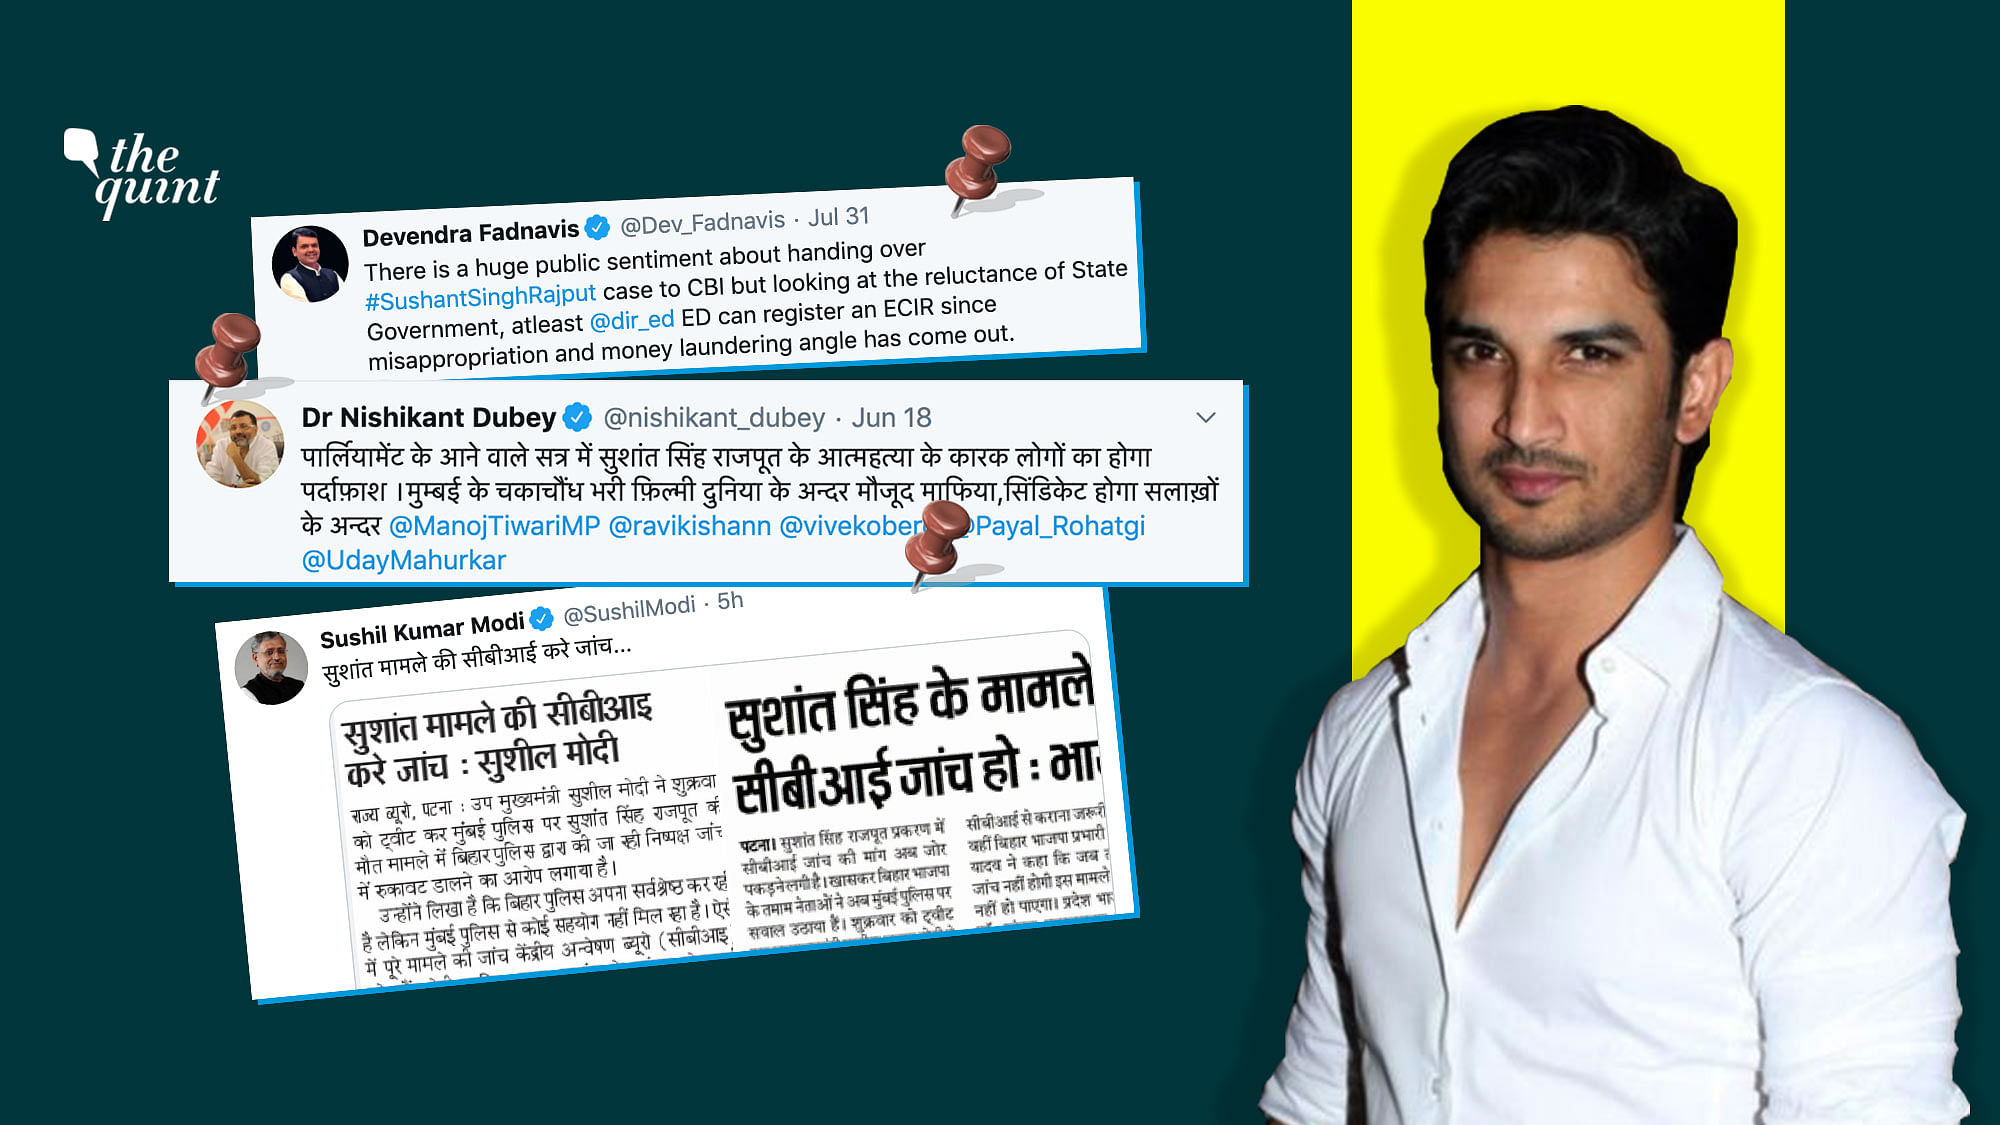 What has driven politicians across all party lines to demand a fair probe into Sushant Singh Rajput’s death?